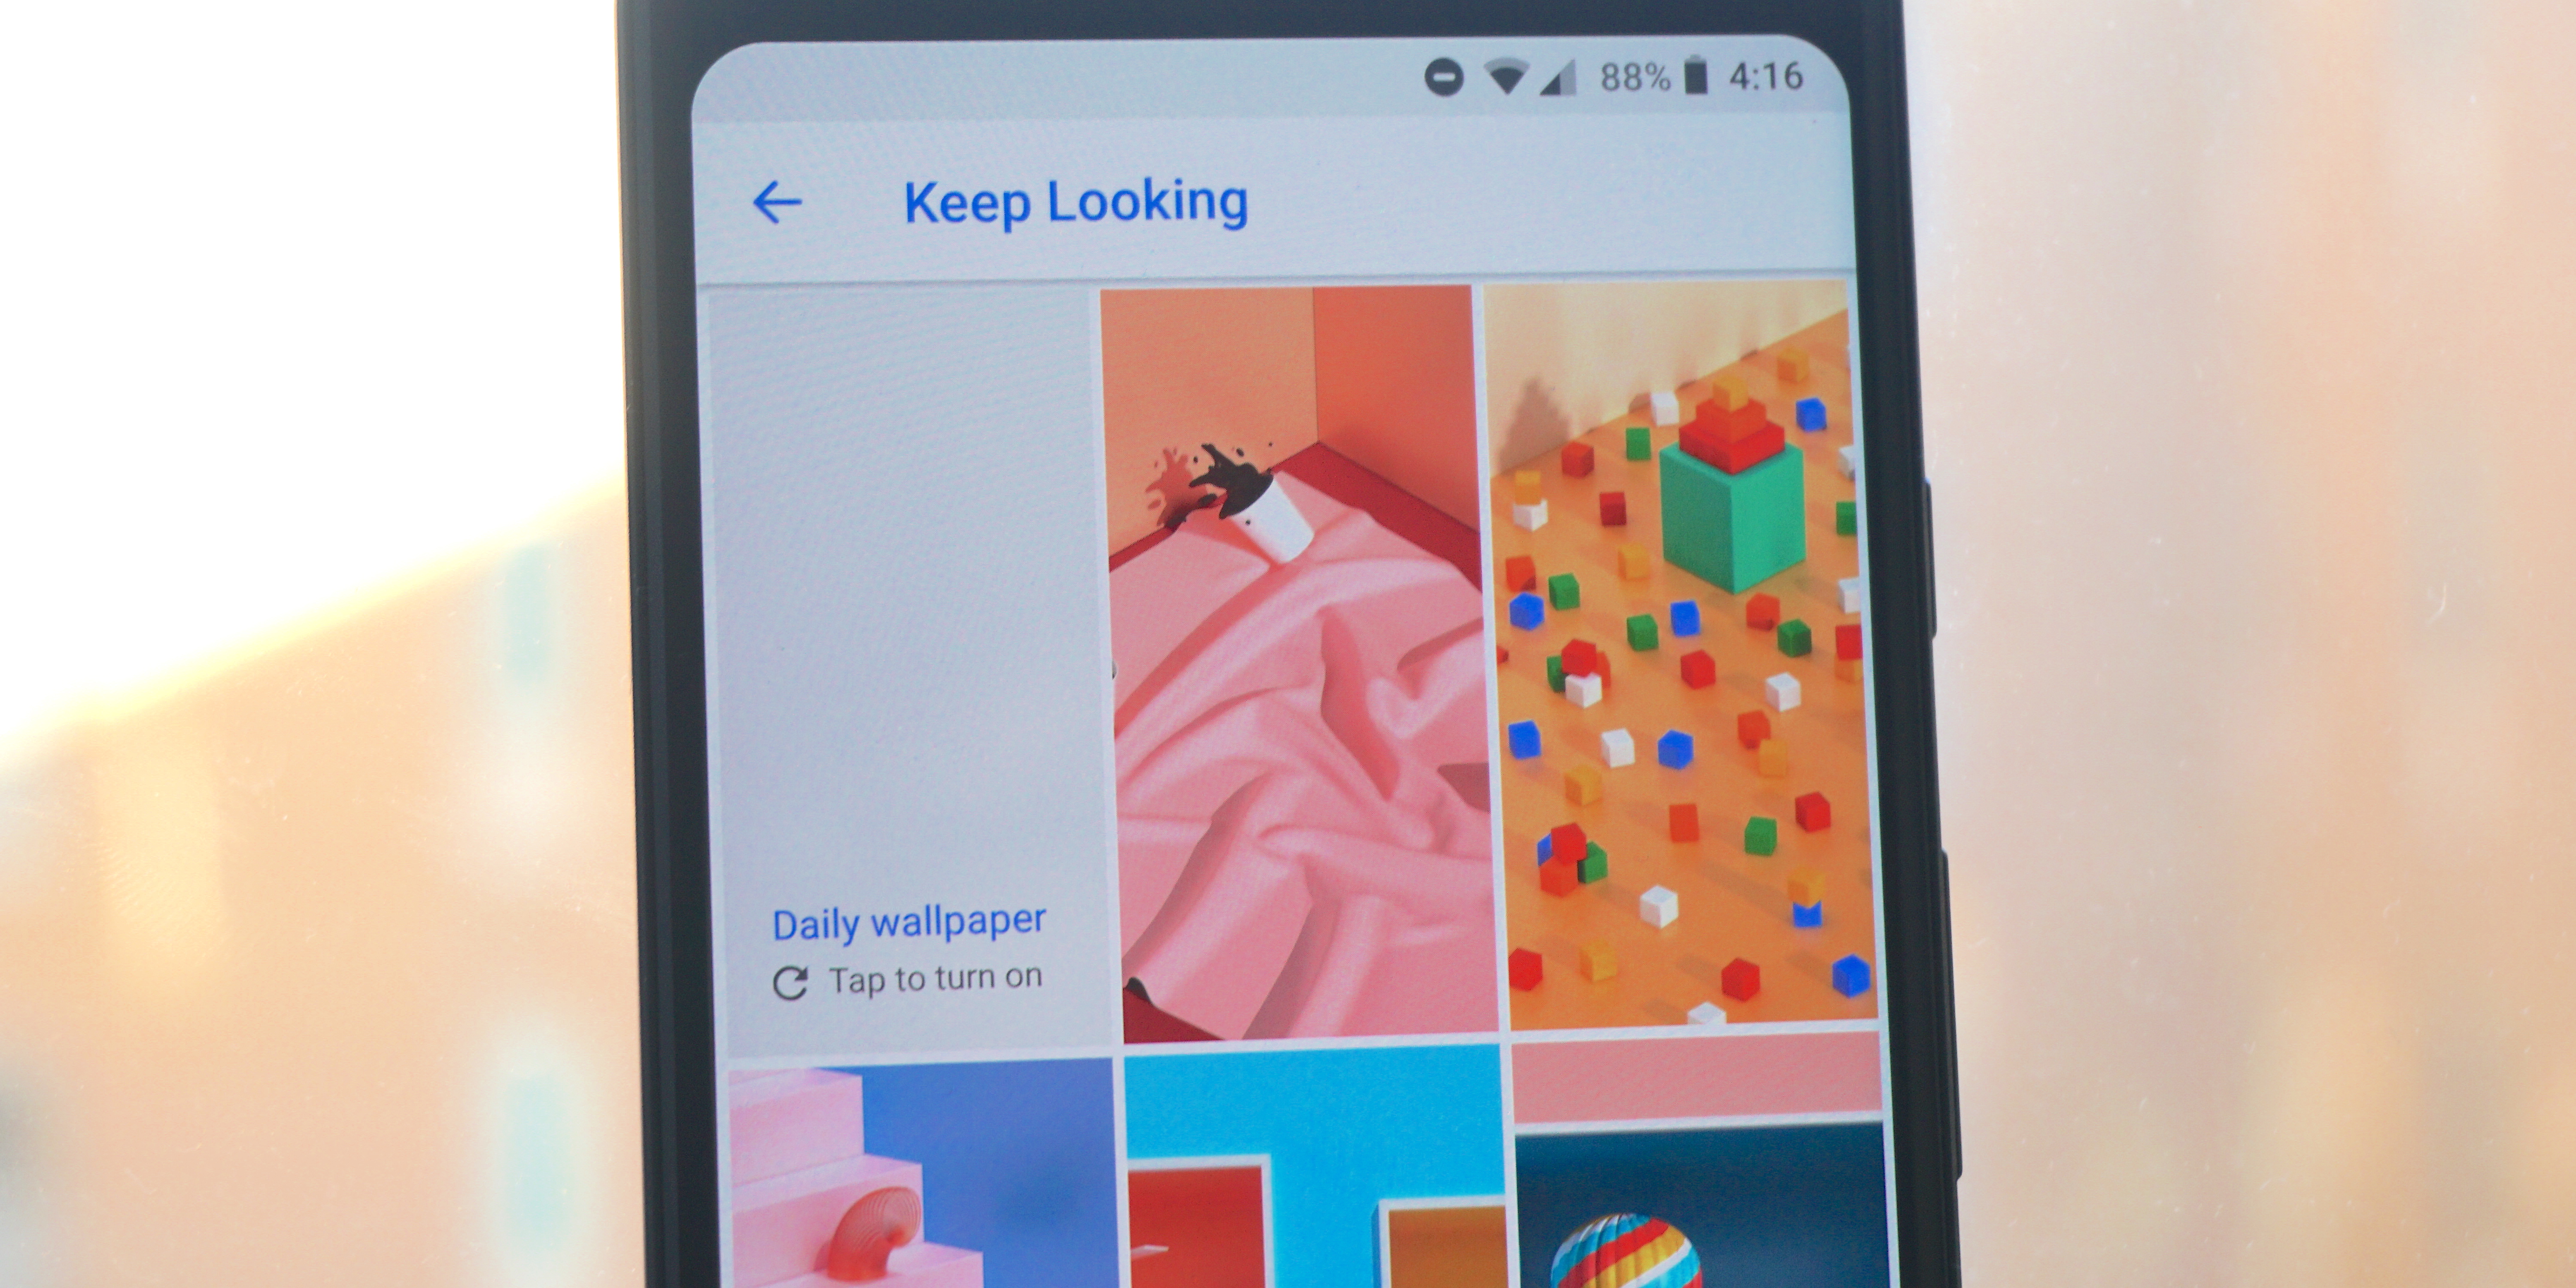 How to set up 'Daily wallpaper' on Google Pixel 2 and 2 XL